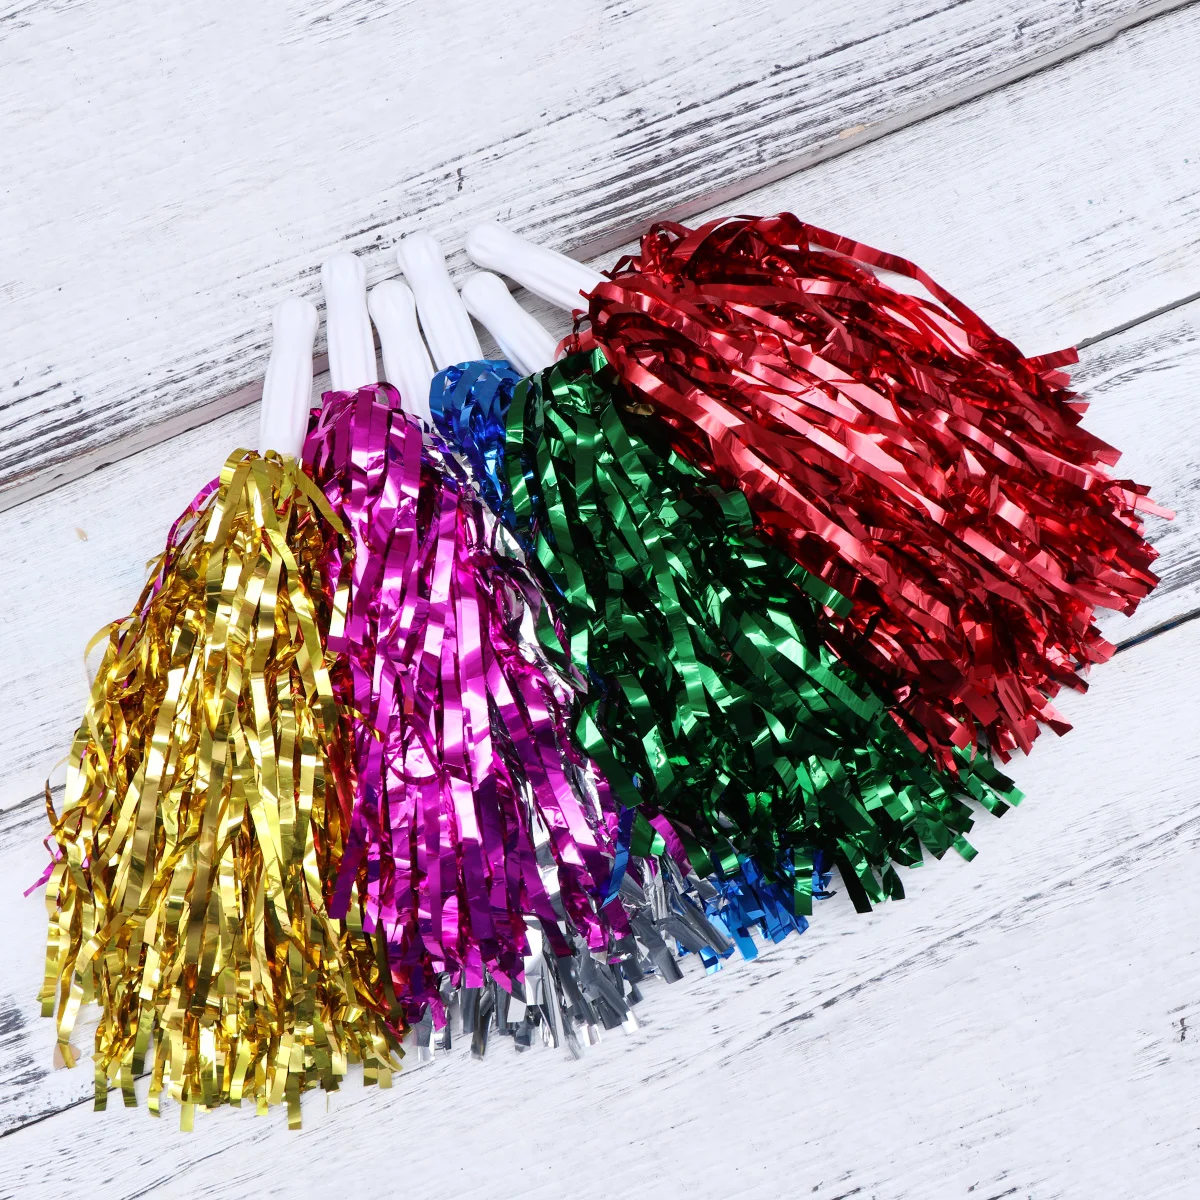 12pcs Straight Handle Cheering Poms Spirited Fun Cheerleading Kit Cheer Props for Performance Competition Cheering Sports Events 3pcs handheld pompoms cheering props gymnastics cheer pompom props for sports events